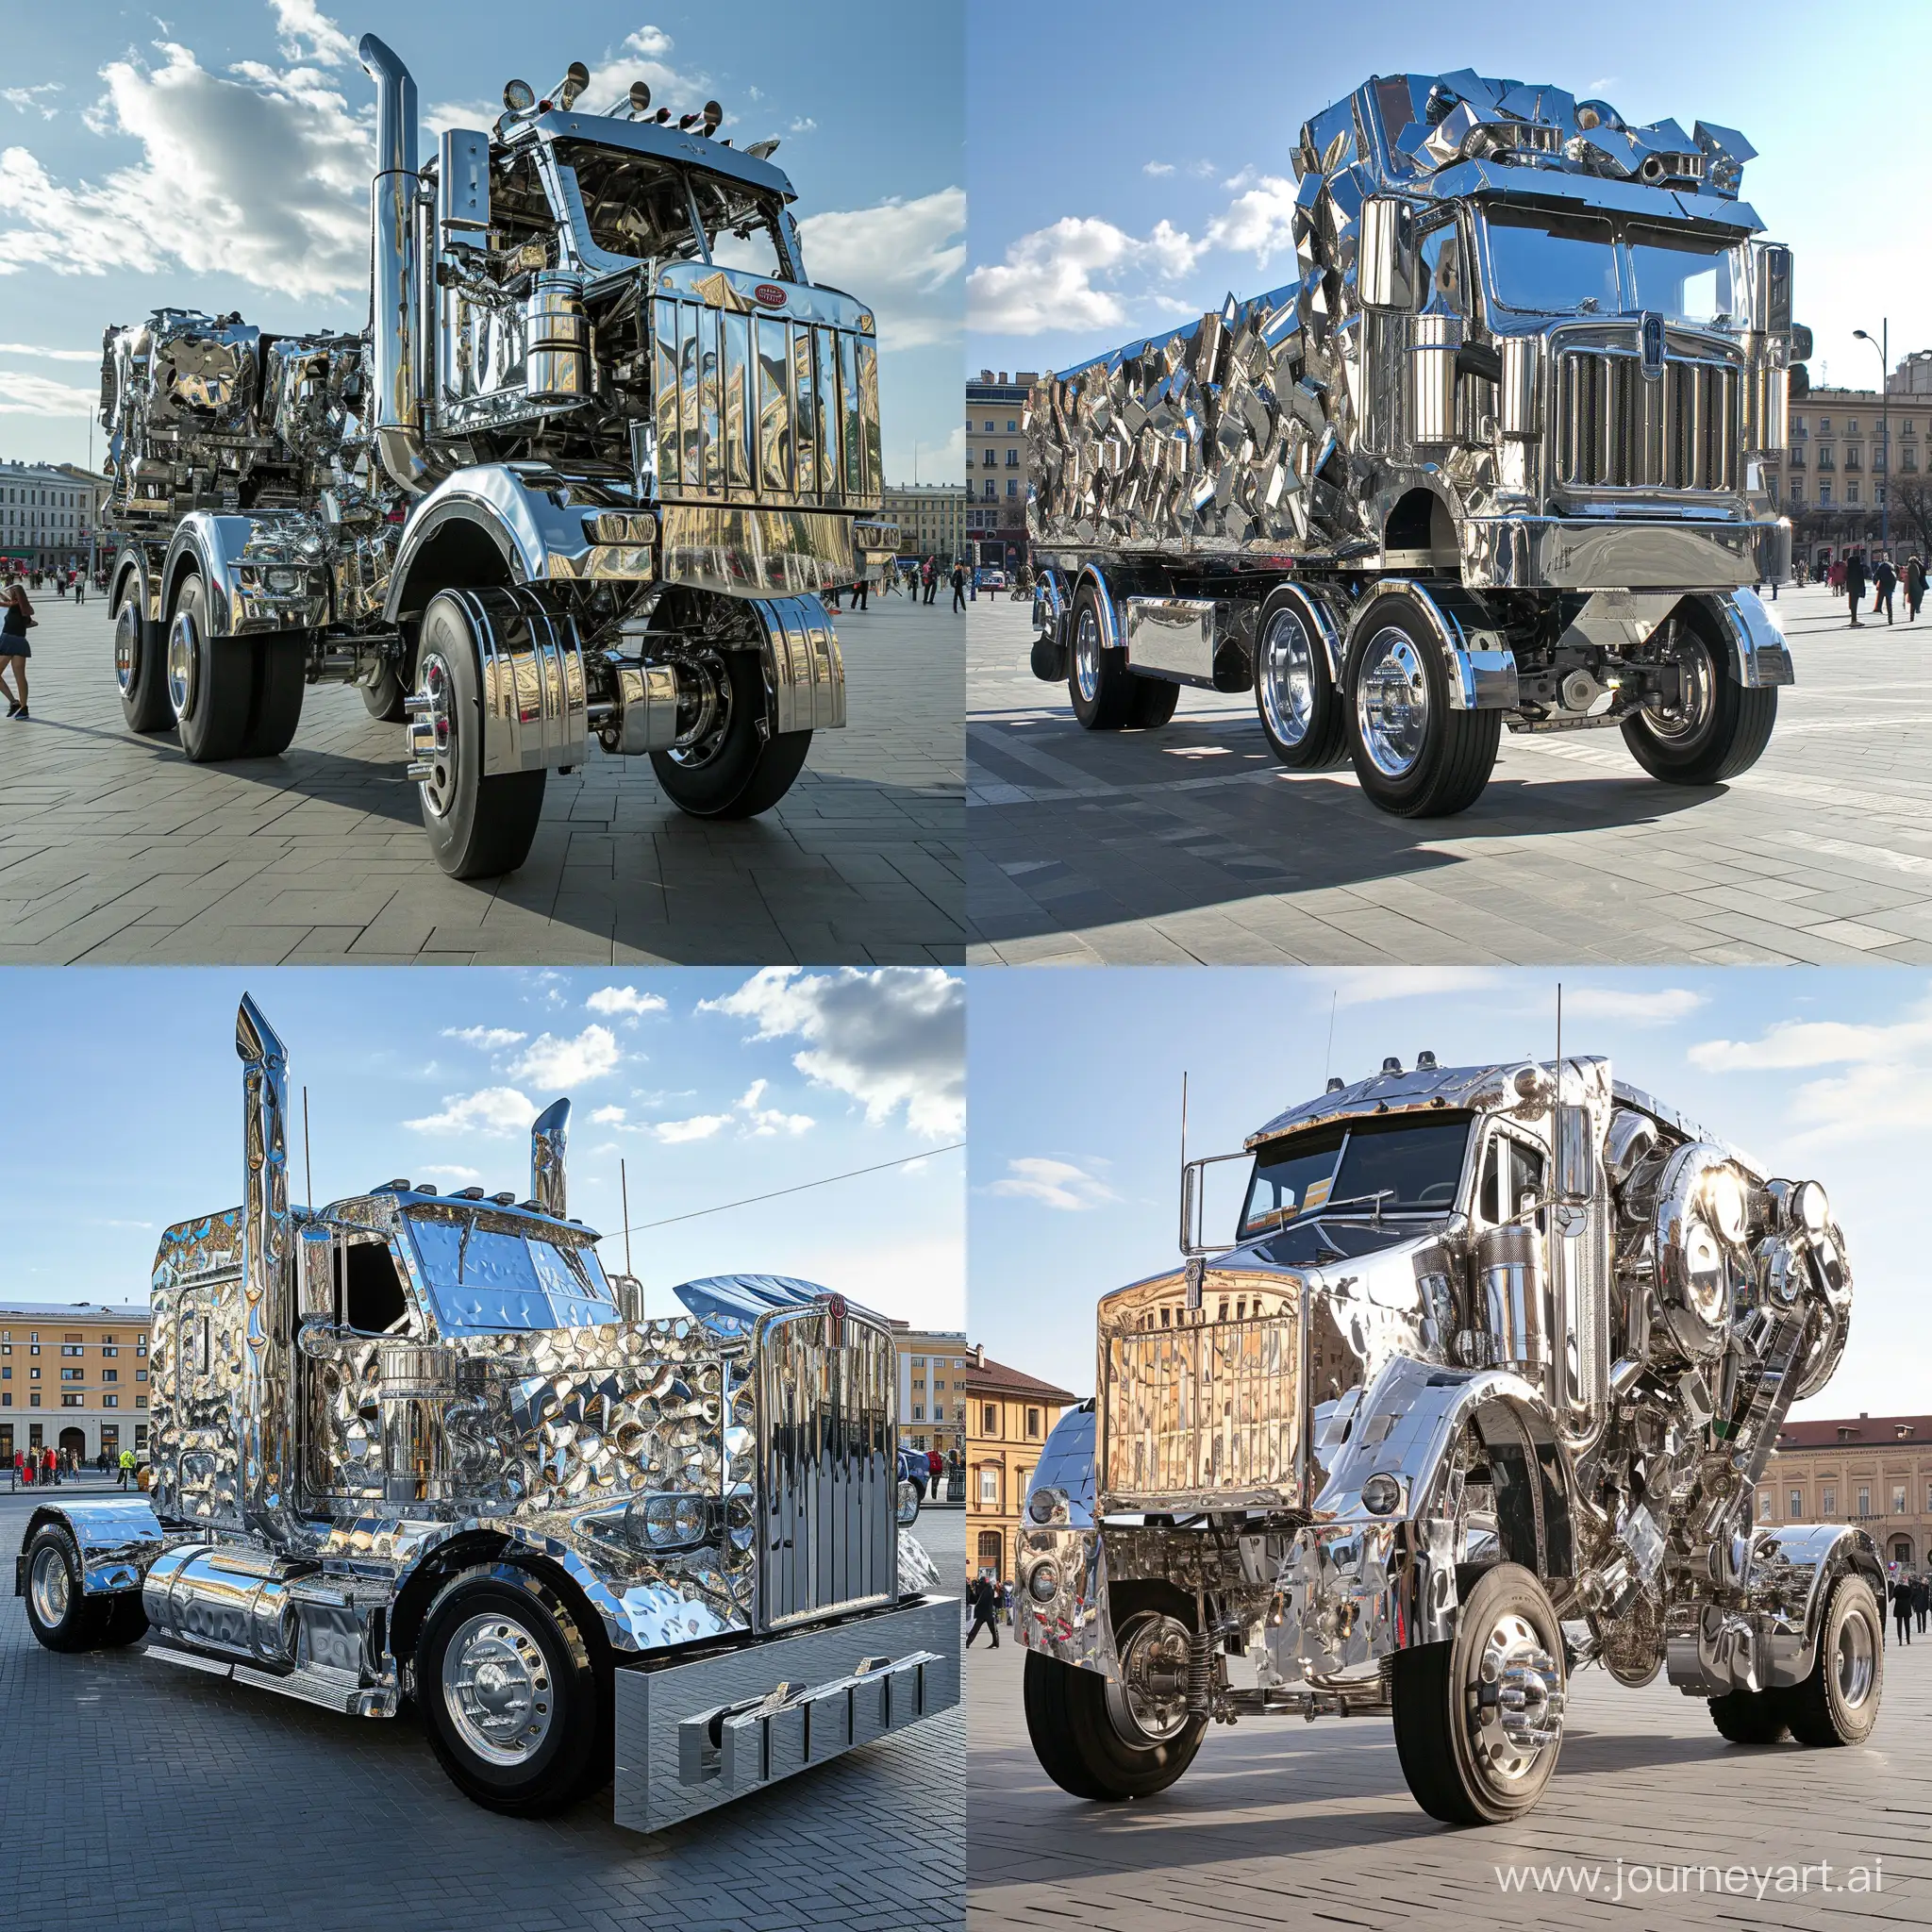 An art object made of chrome-plated truck parts stands on the central square of the city, photo reality